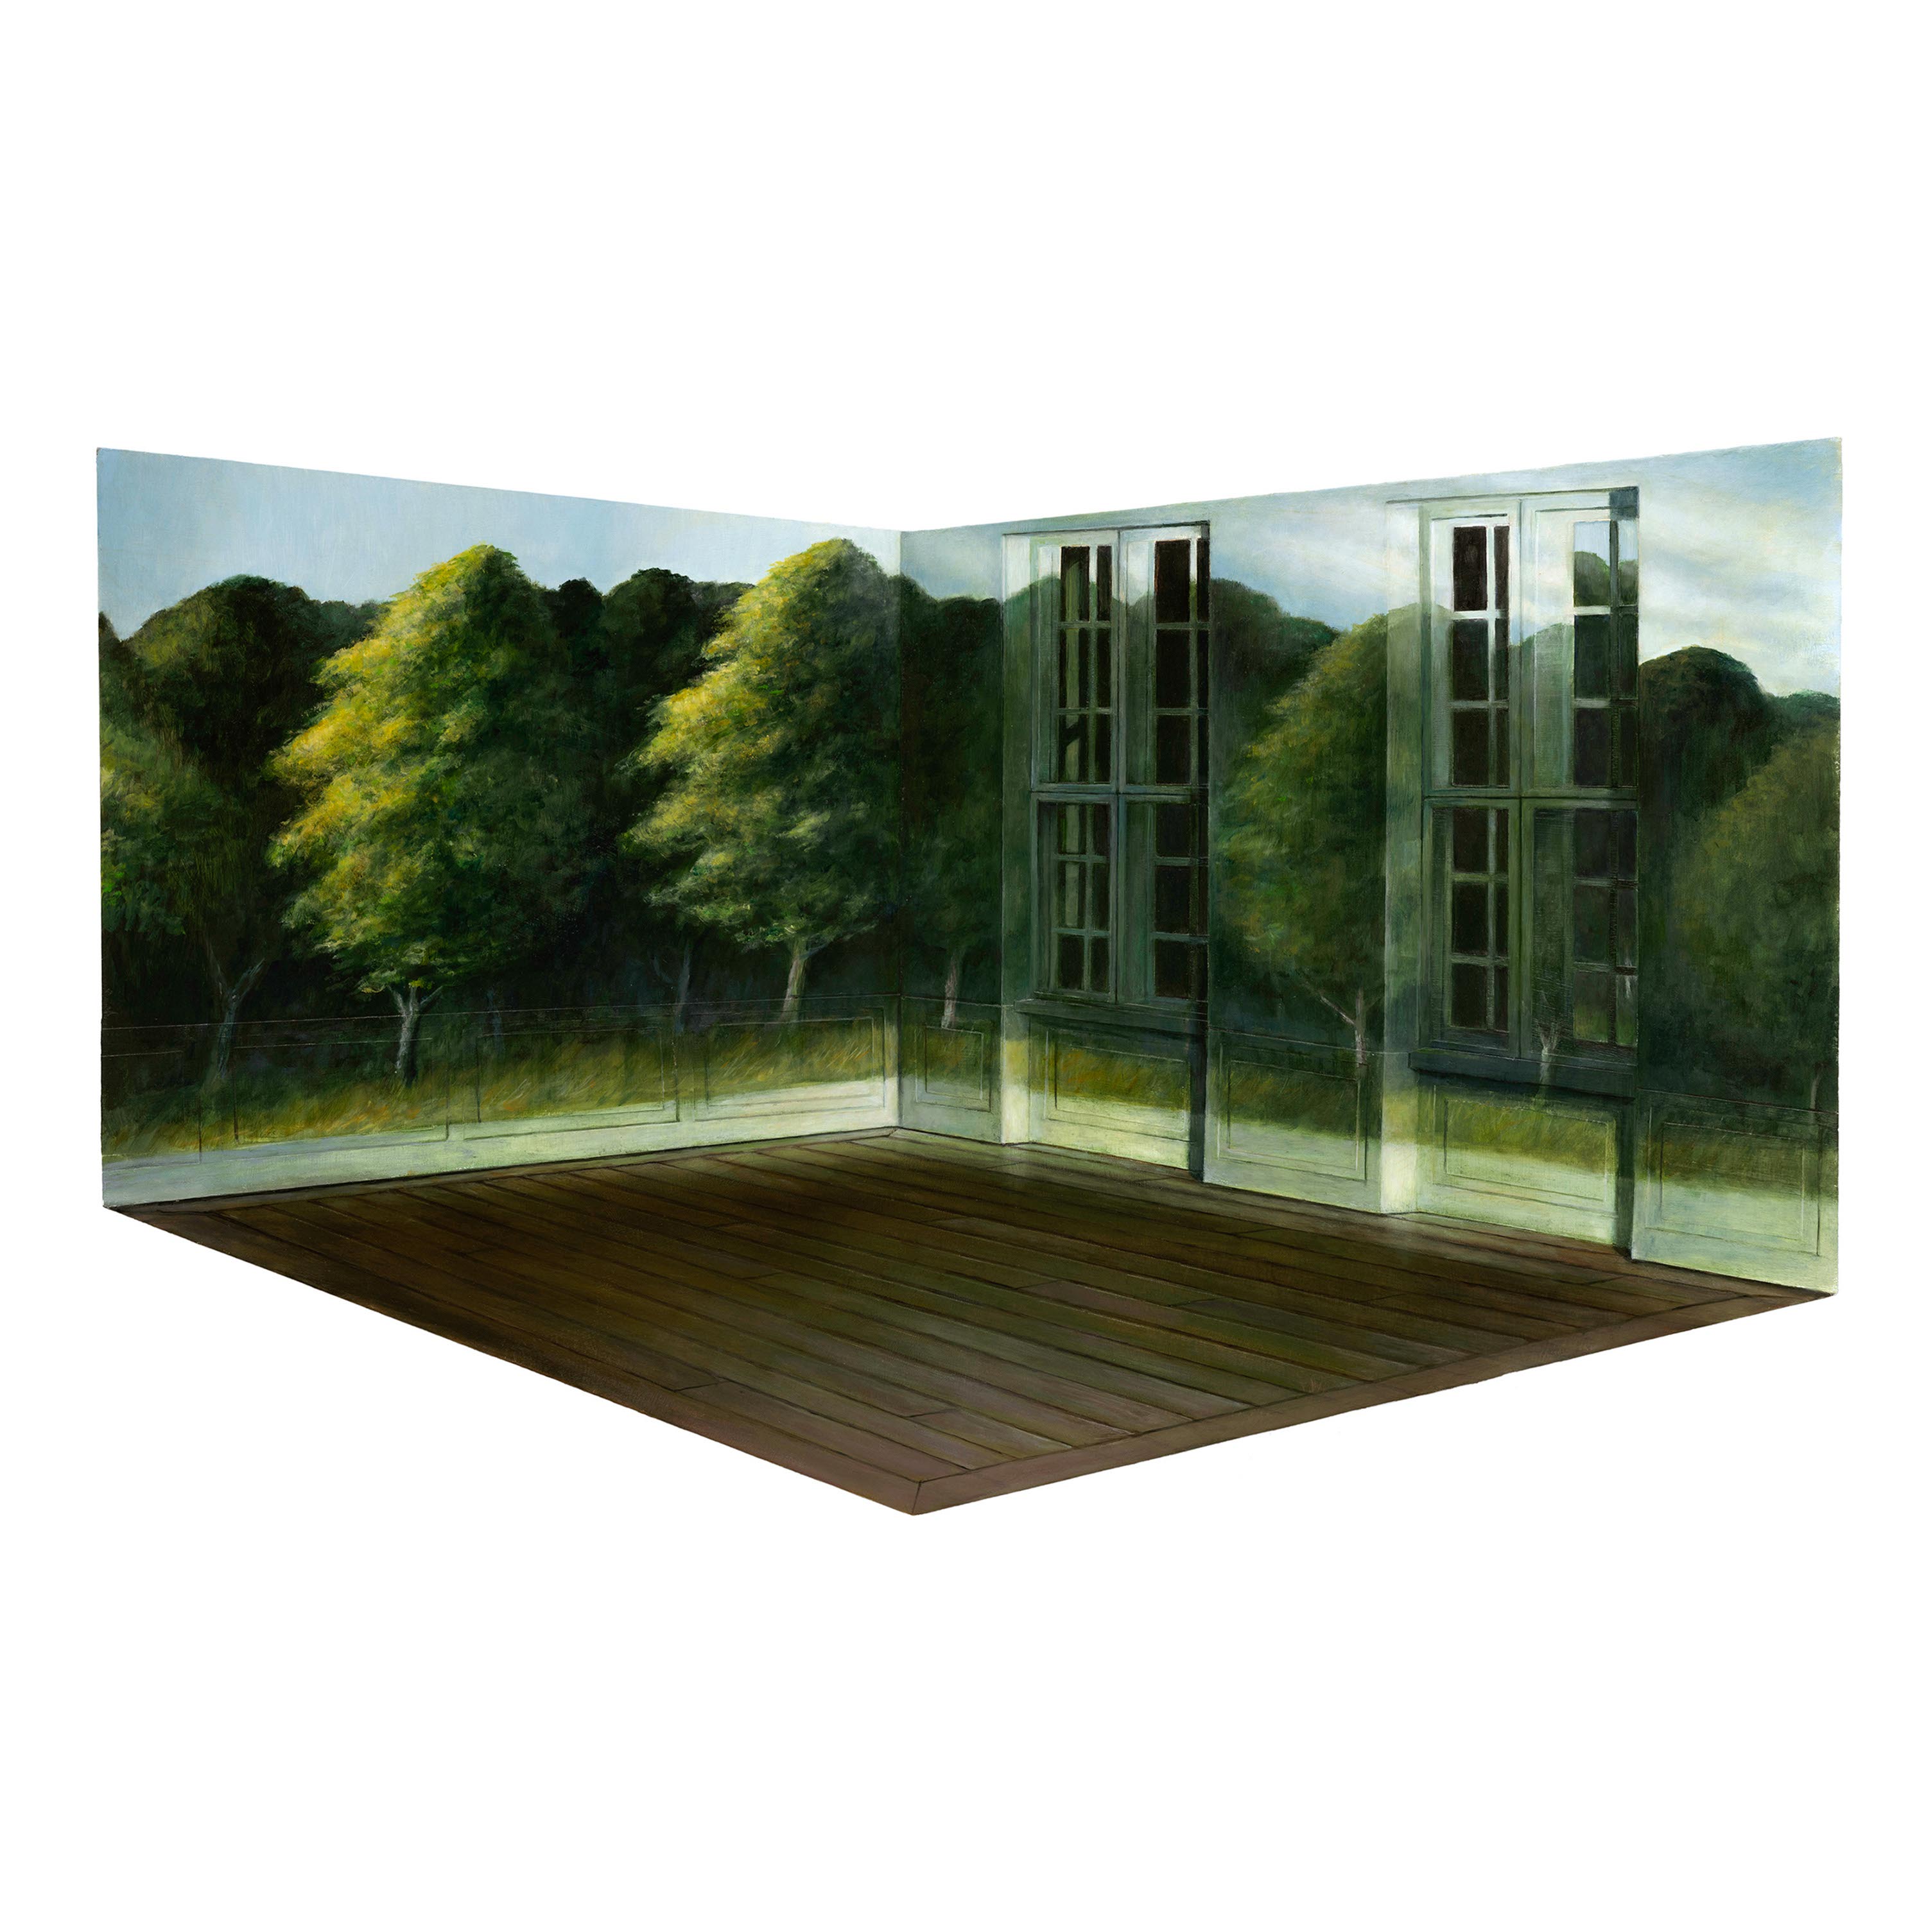 Michael Banning, Hopper’s “Road and Trees” Projected over a Model of Hammershøi’s Room, 2019, Oil on shaped and raised relief panel